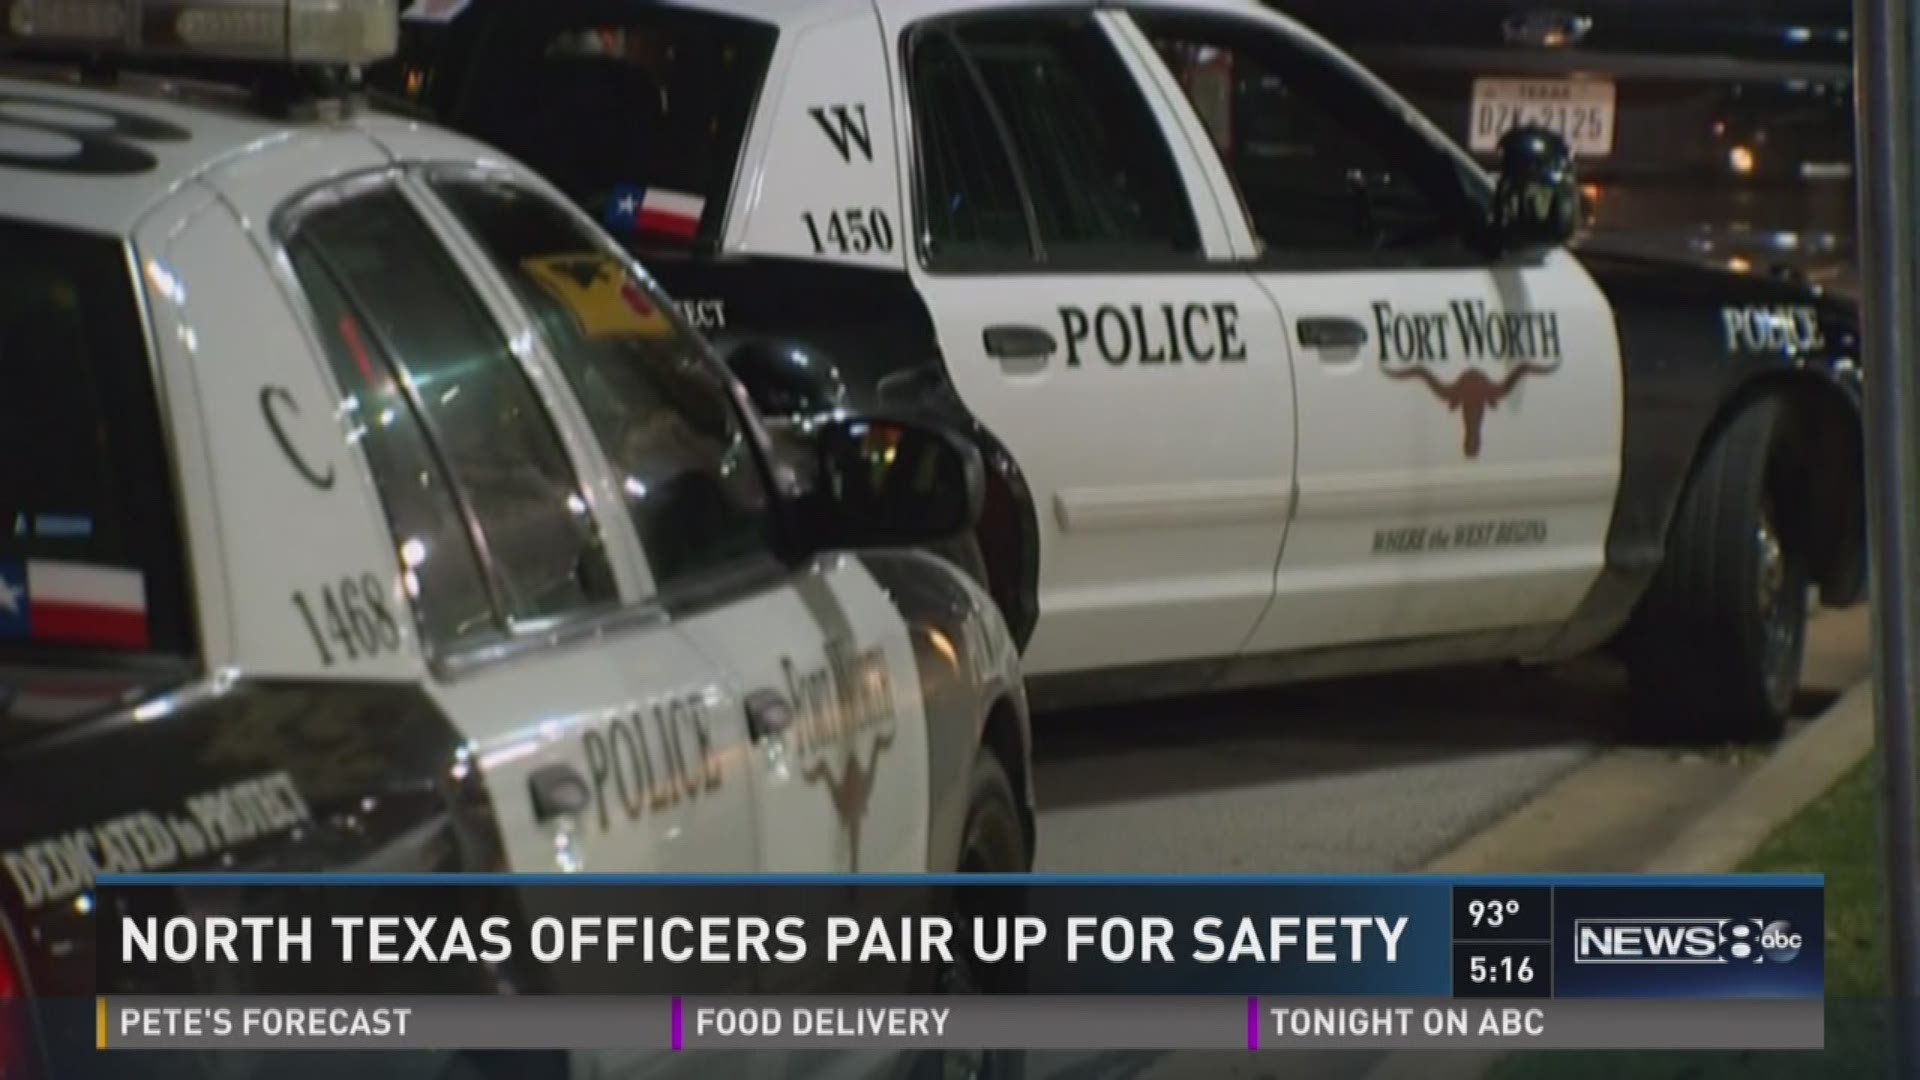 North Texas Officers Pair Up for Safety